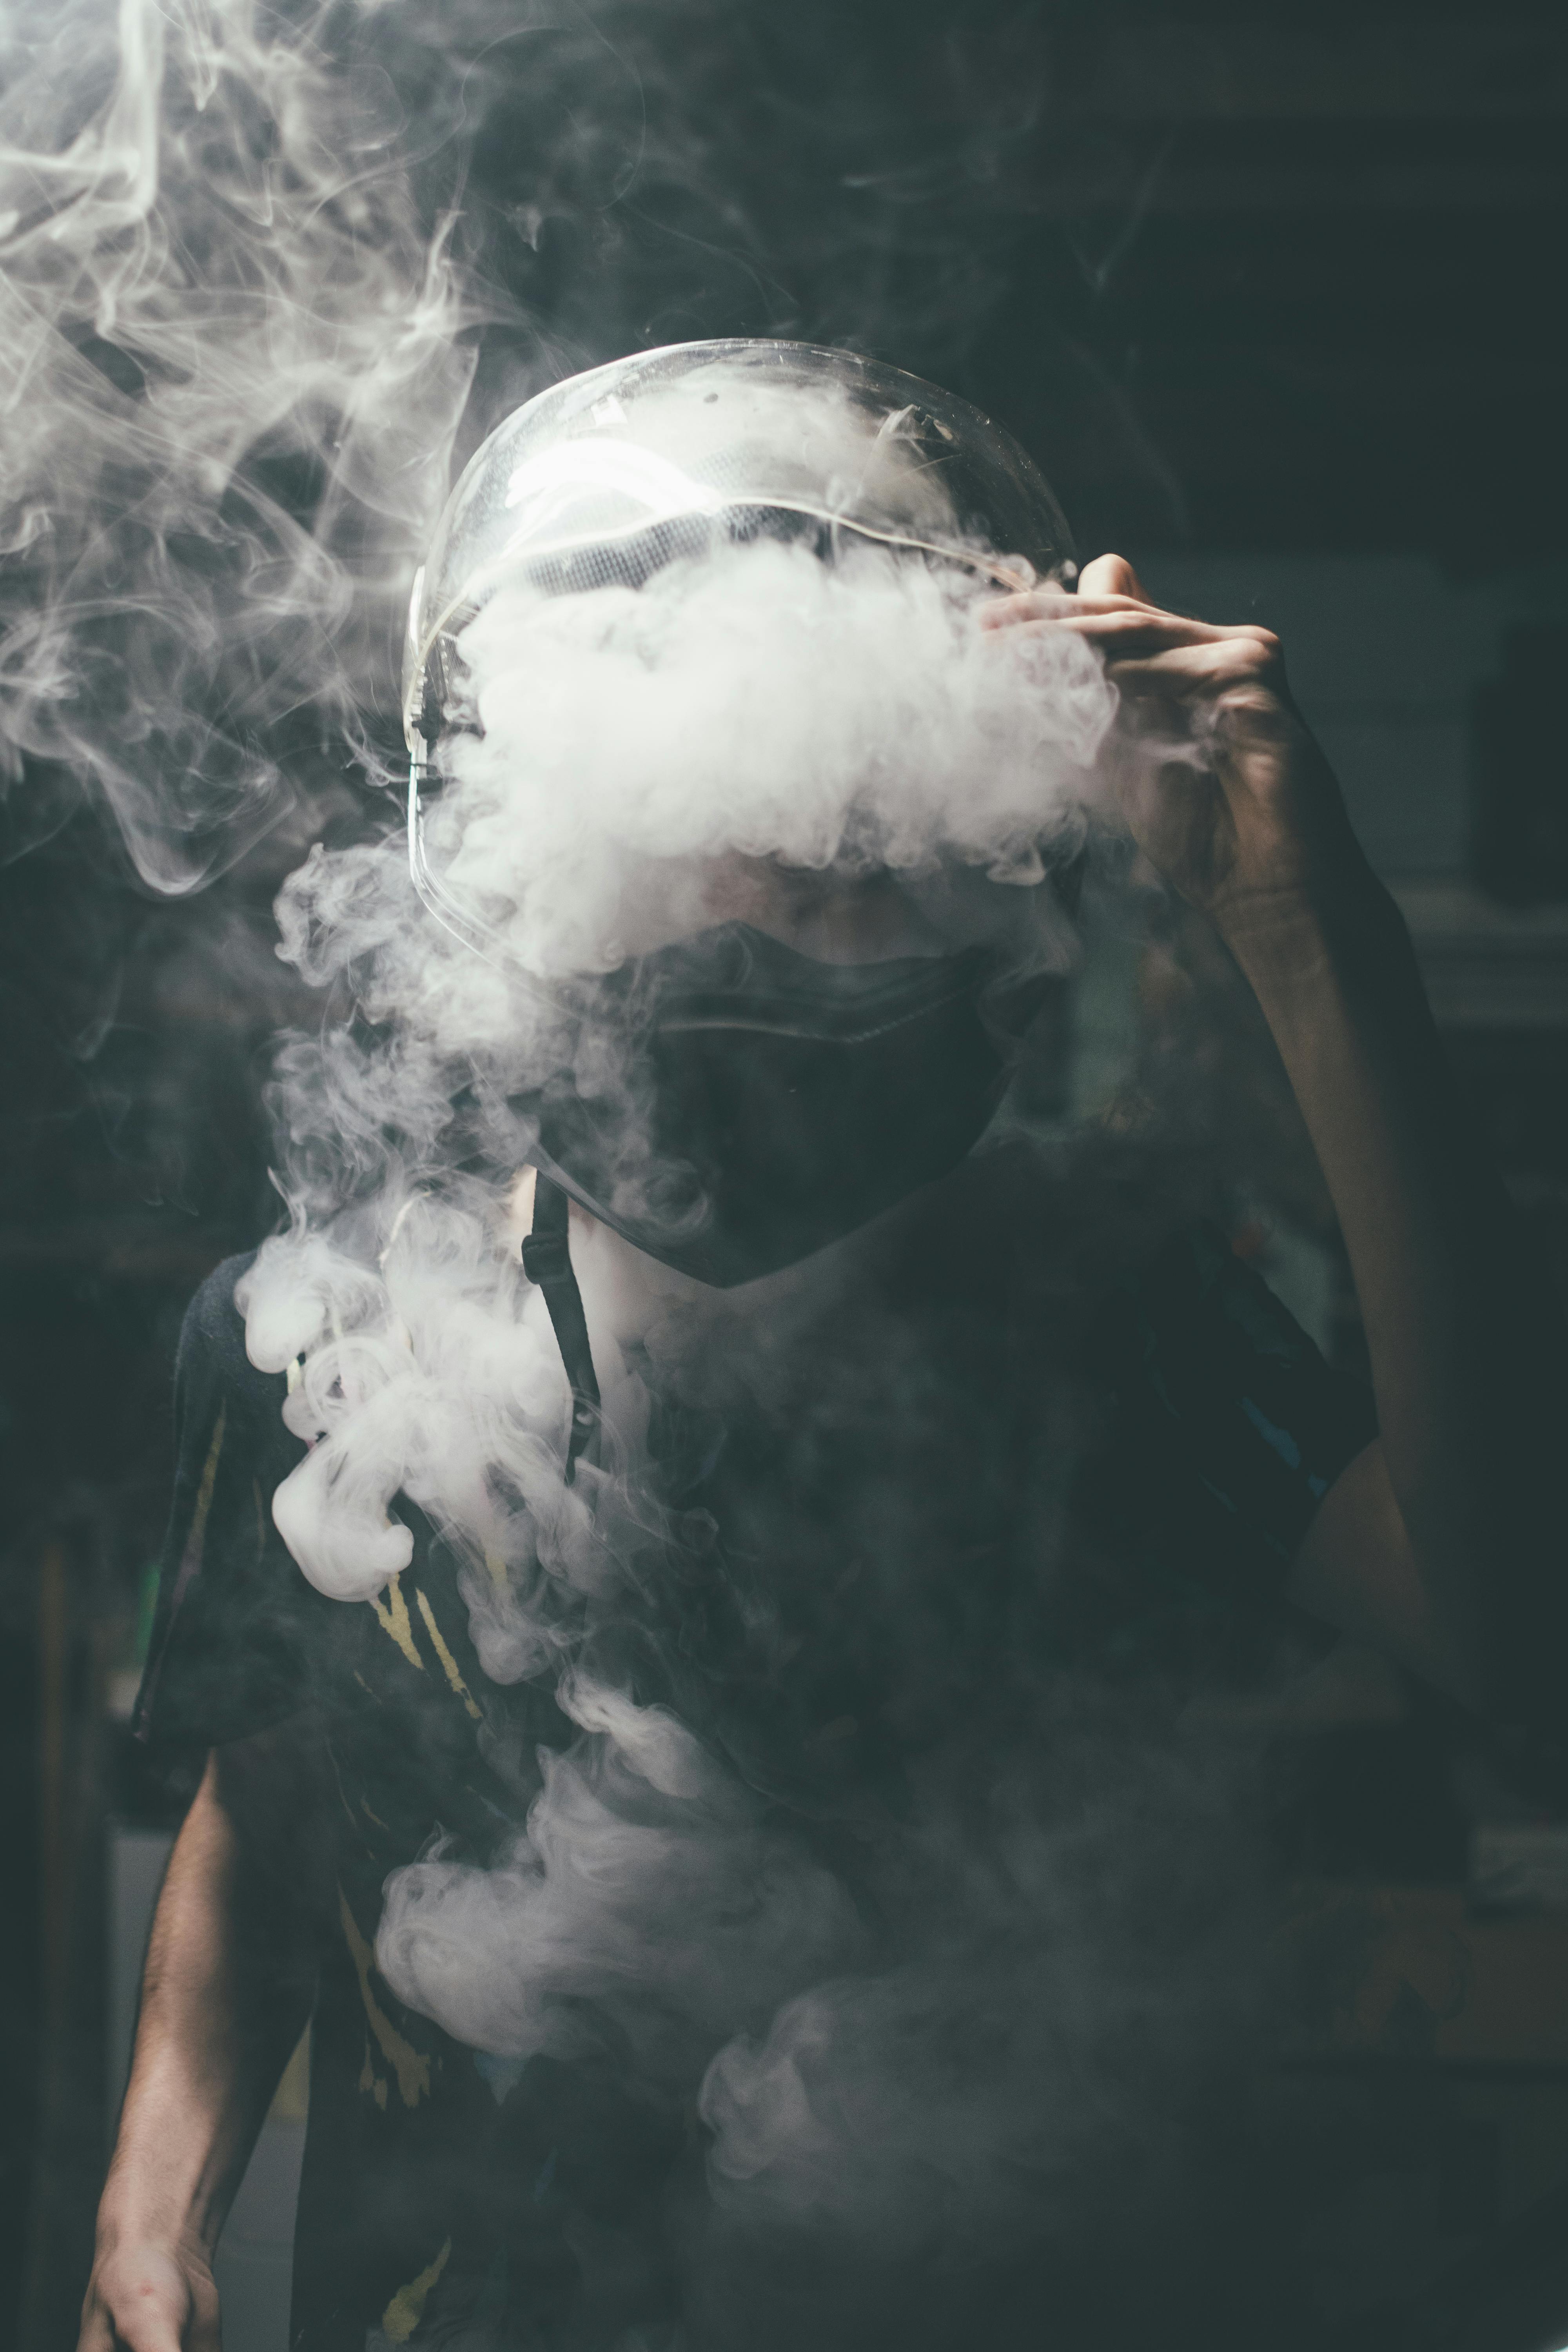 Cigarette Smoke Images | Free Photos, PNG Stickers, Wallpapers & Backgrounds  - rawpixel